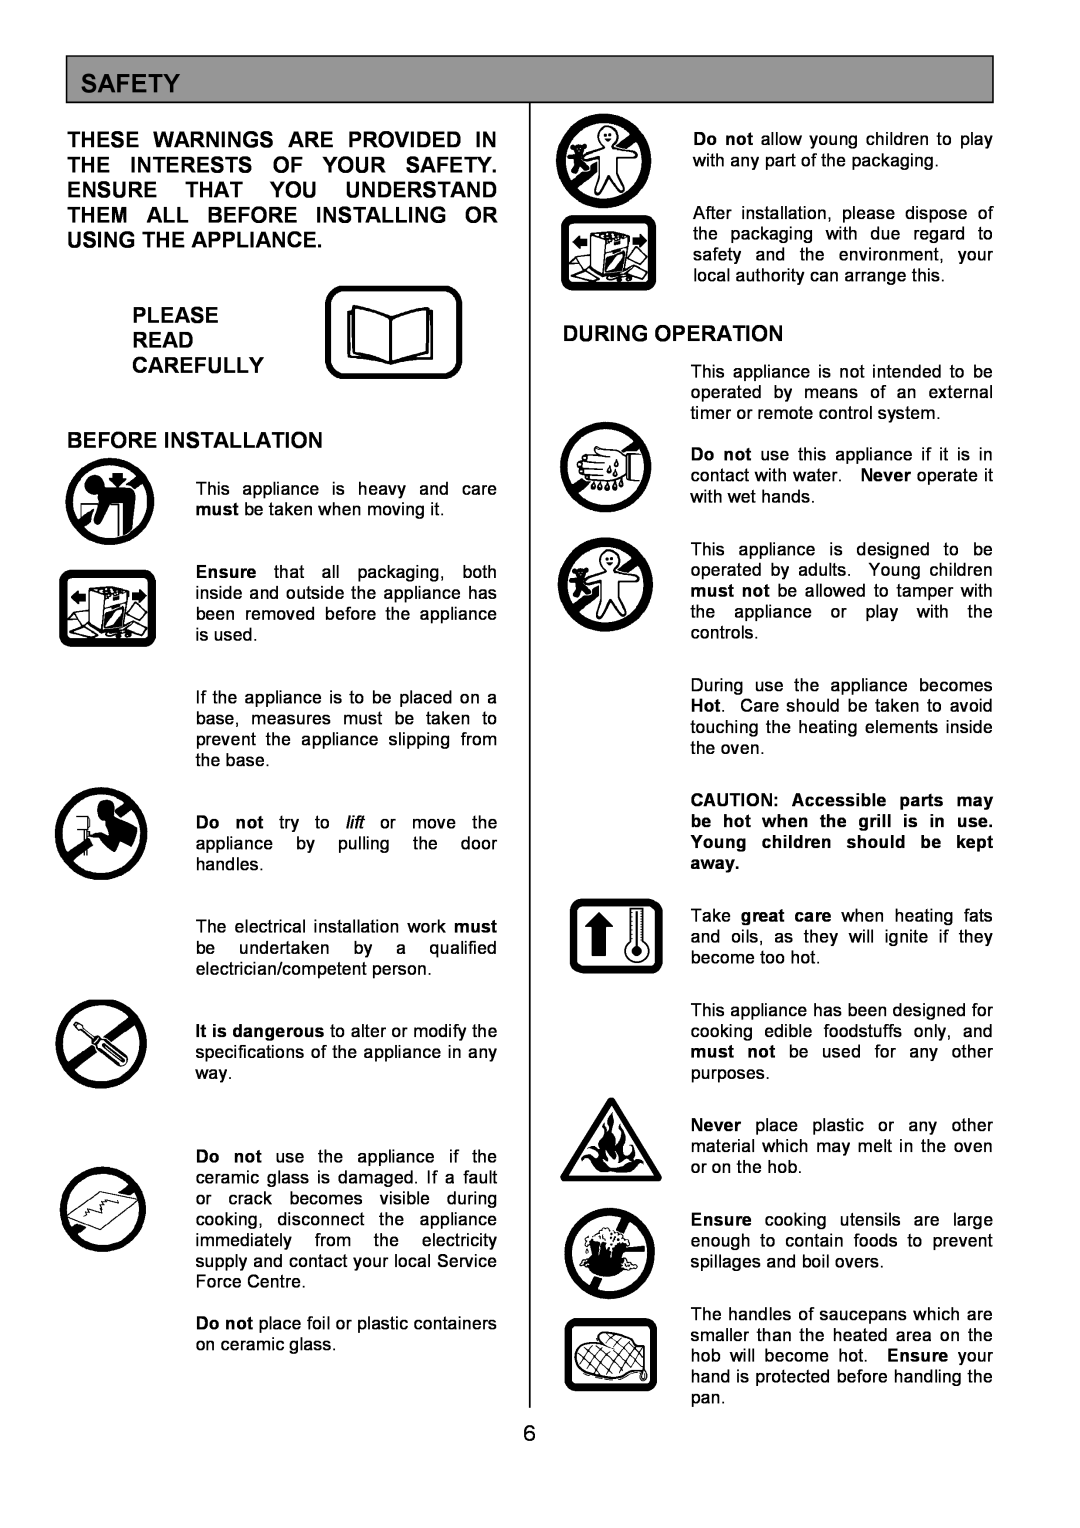 Tricity Bendix SE454 installation instructions Safety, Please Read Carefully Before Installation, During Operation 